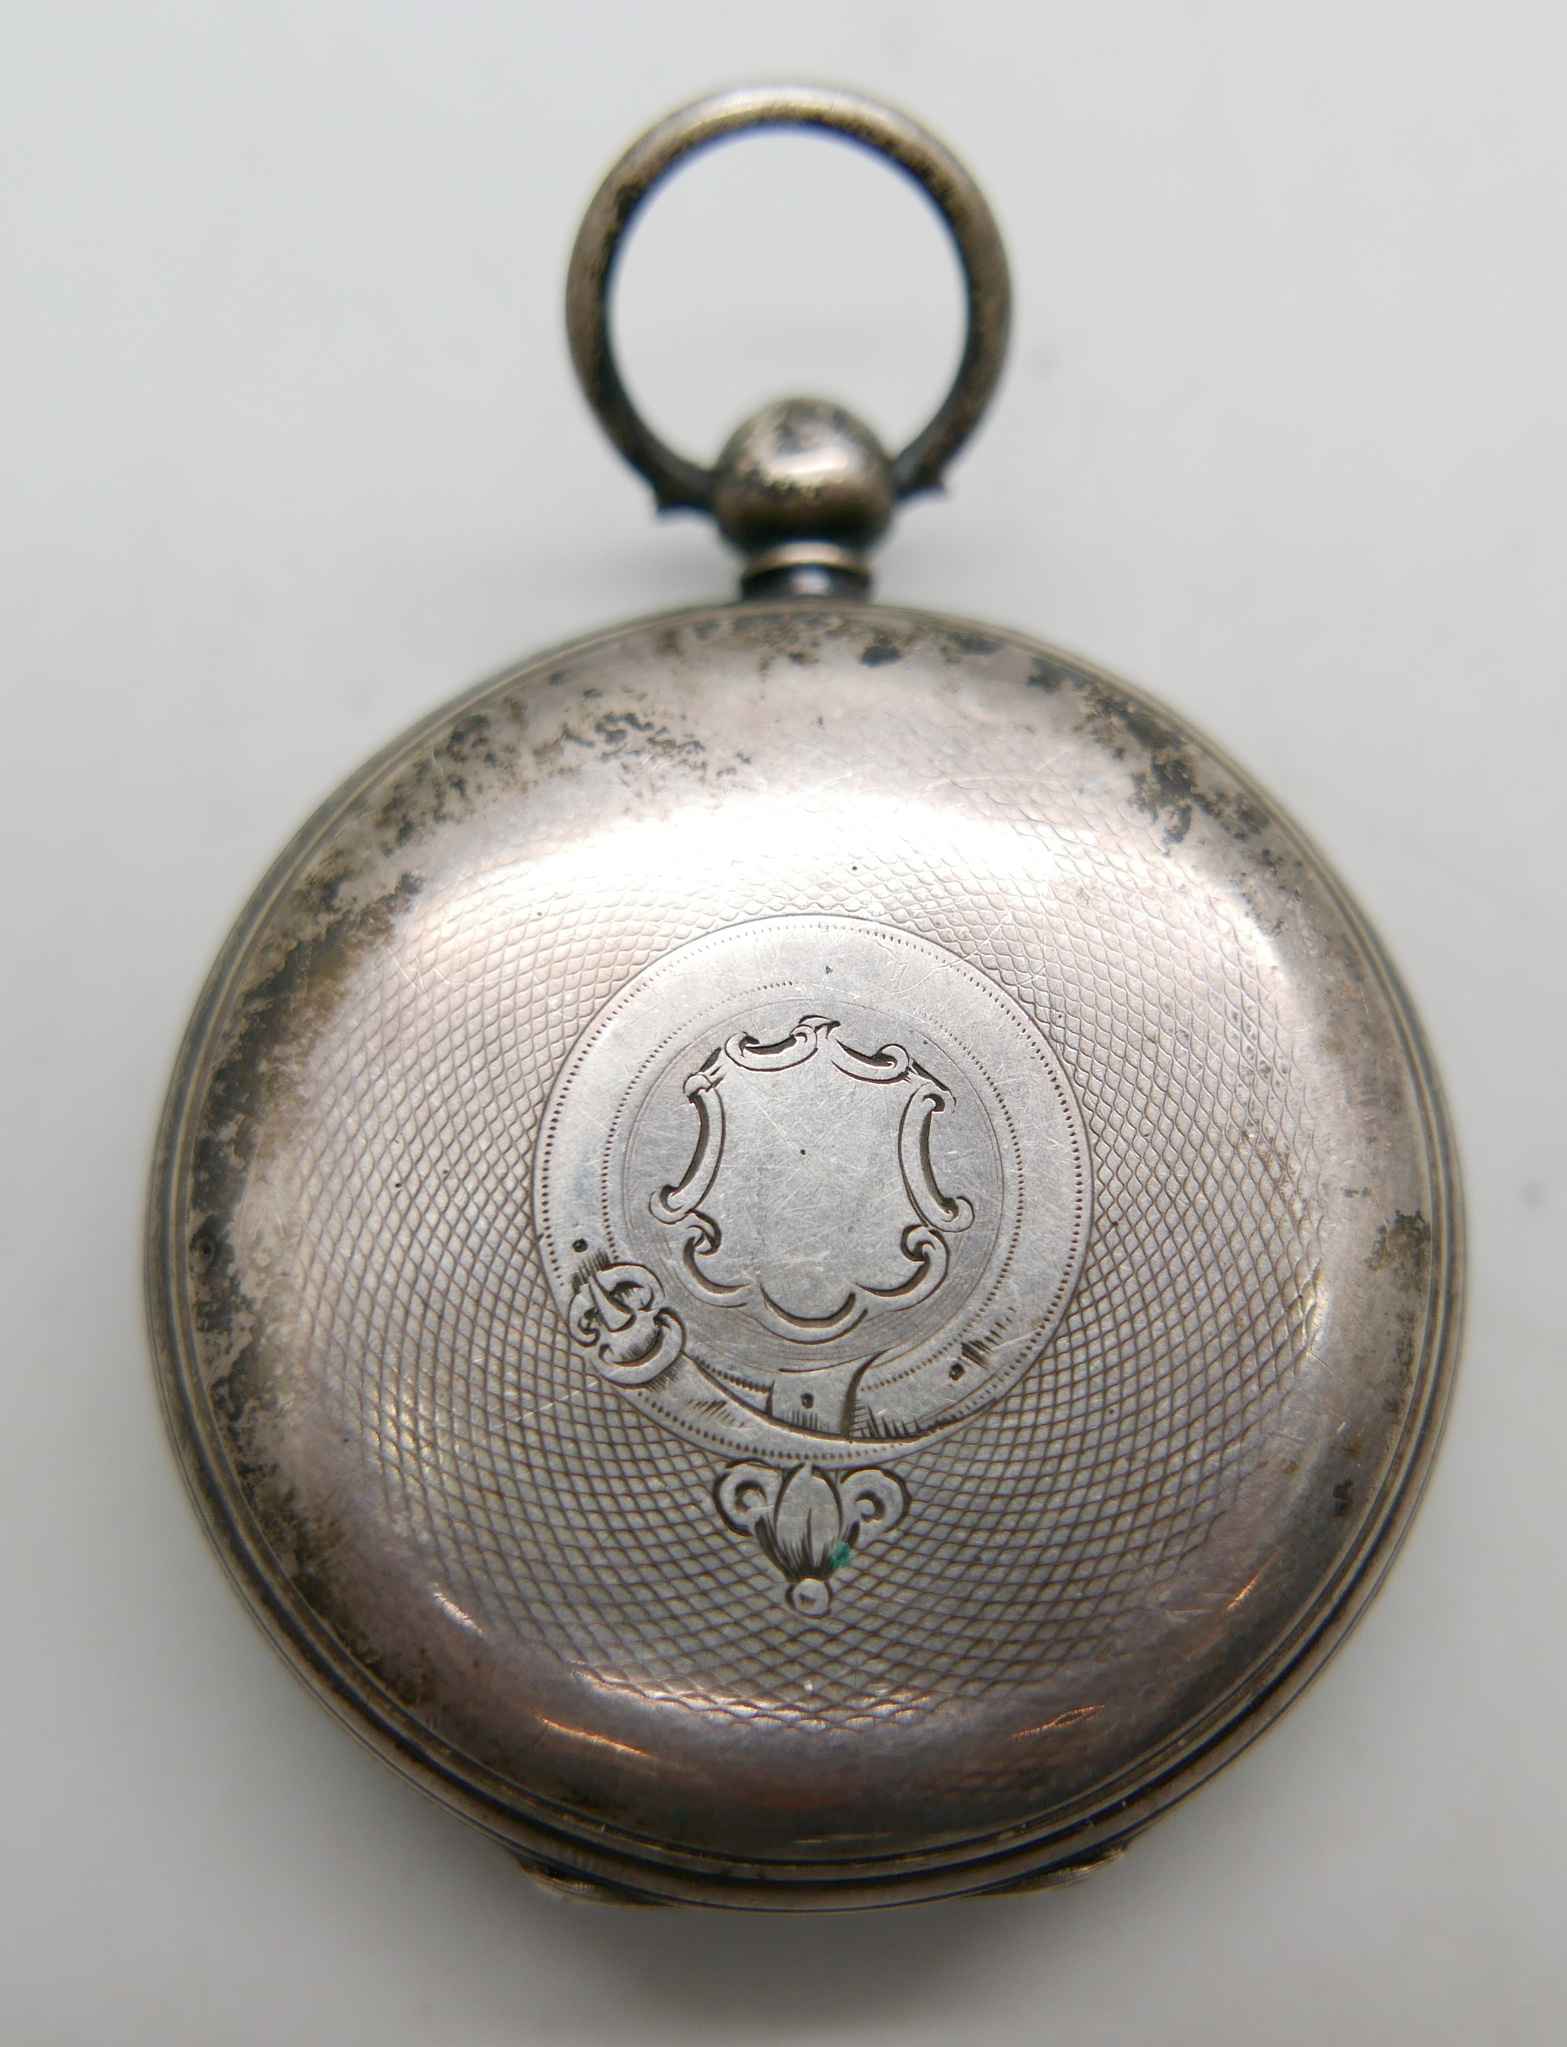 A silver pocket watch, London 1857 - Image 2 of 2